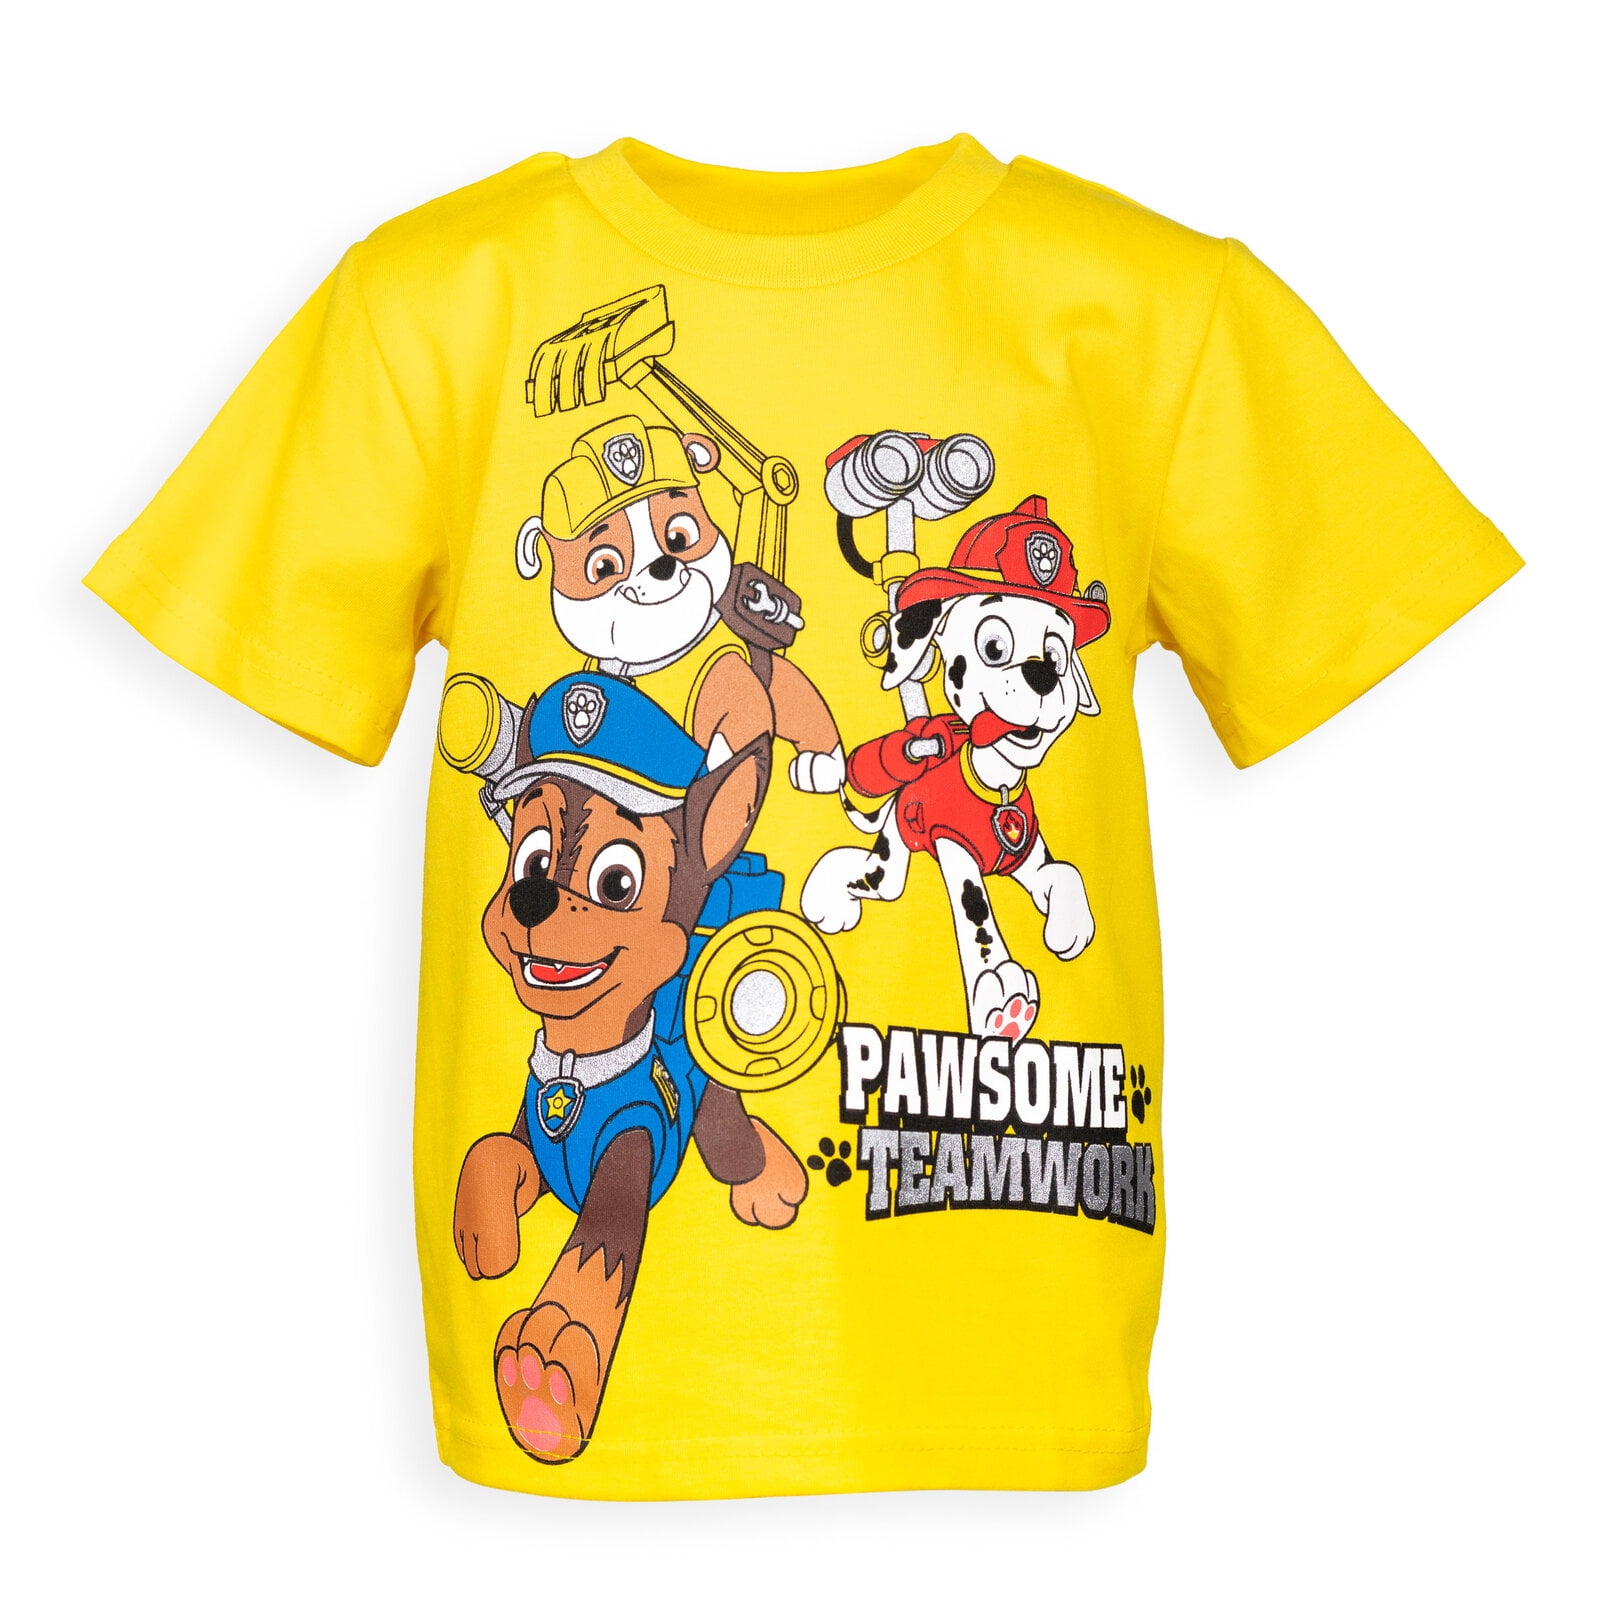 Paw Patrol Chase Marshall Rubble Toddler Boys 4 Pack T-Shirts Toddler to  Little Kid